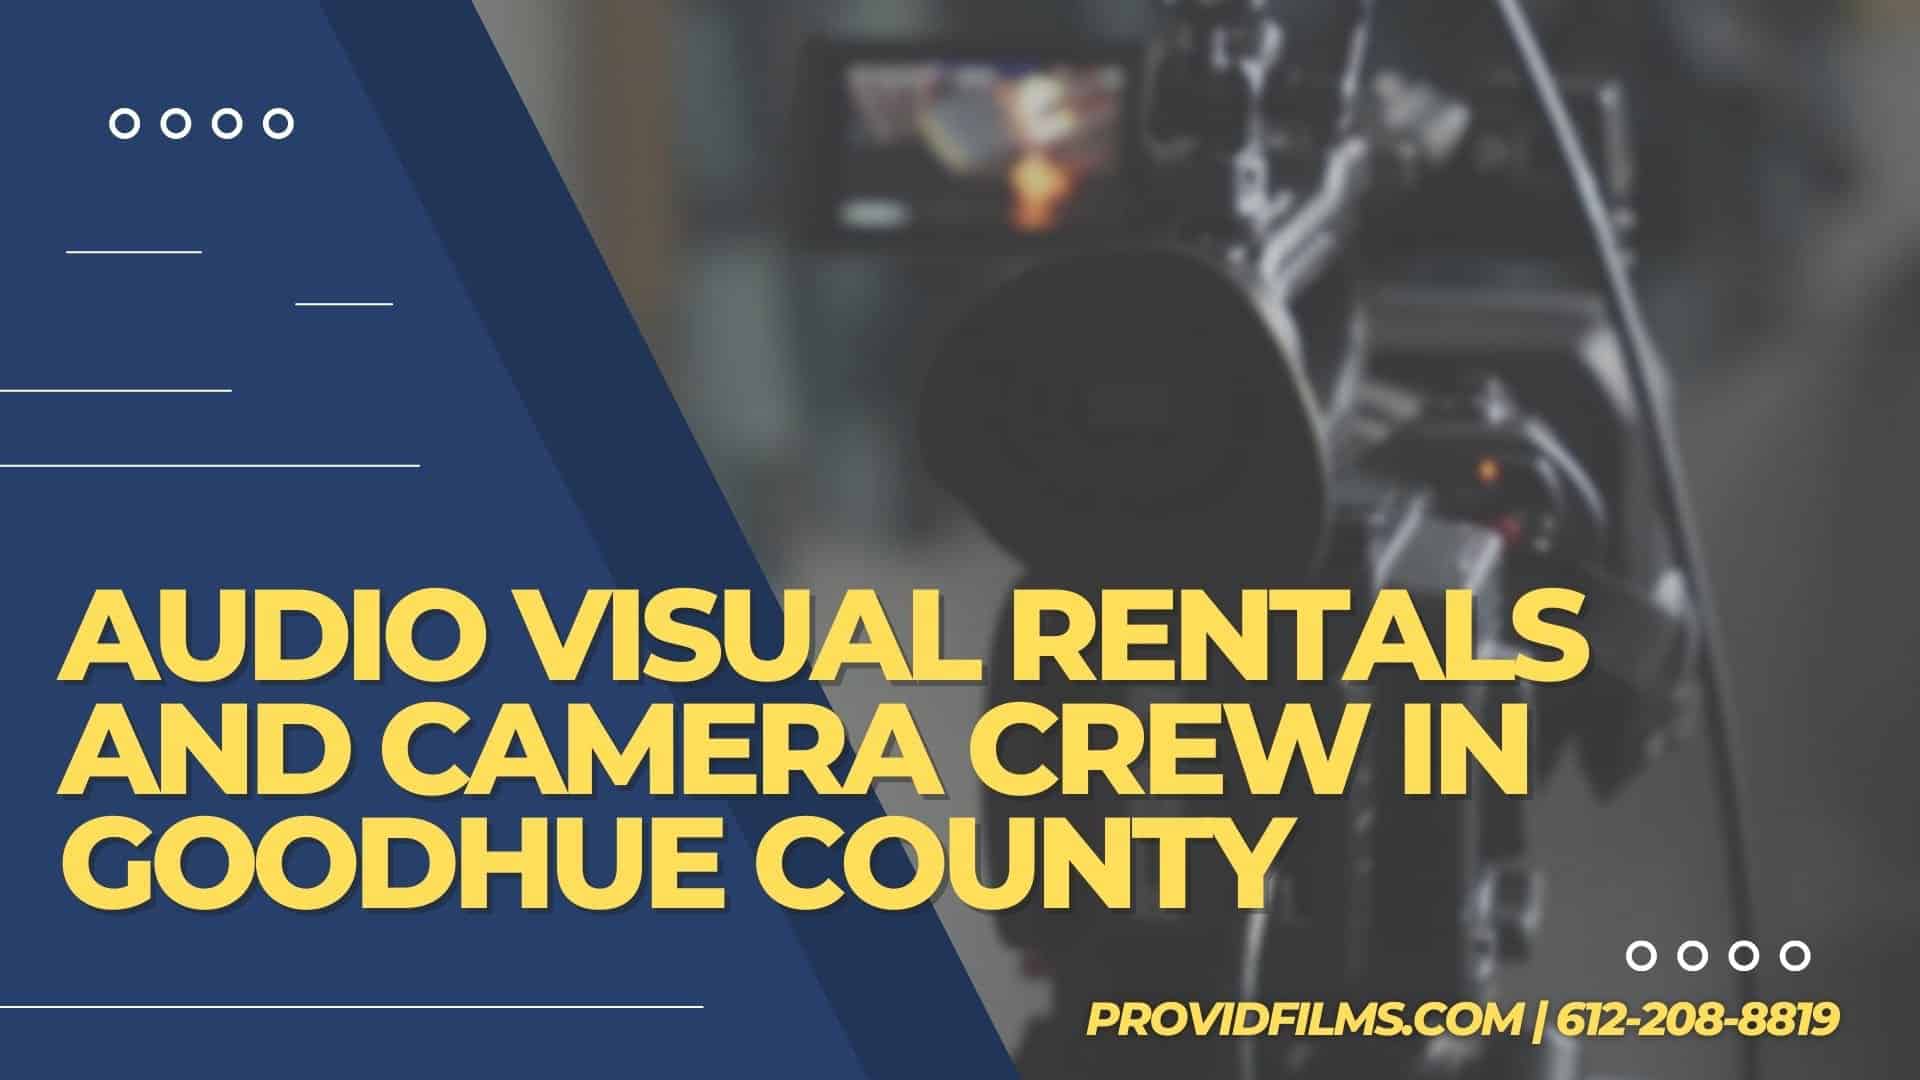 Graphic with a video camera crew with the text saying "AV Rental and Camera Crew in Goodhue County"